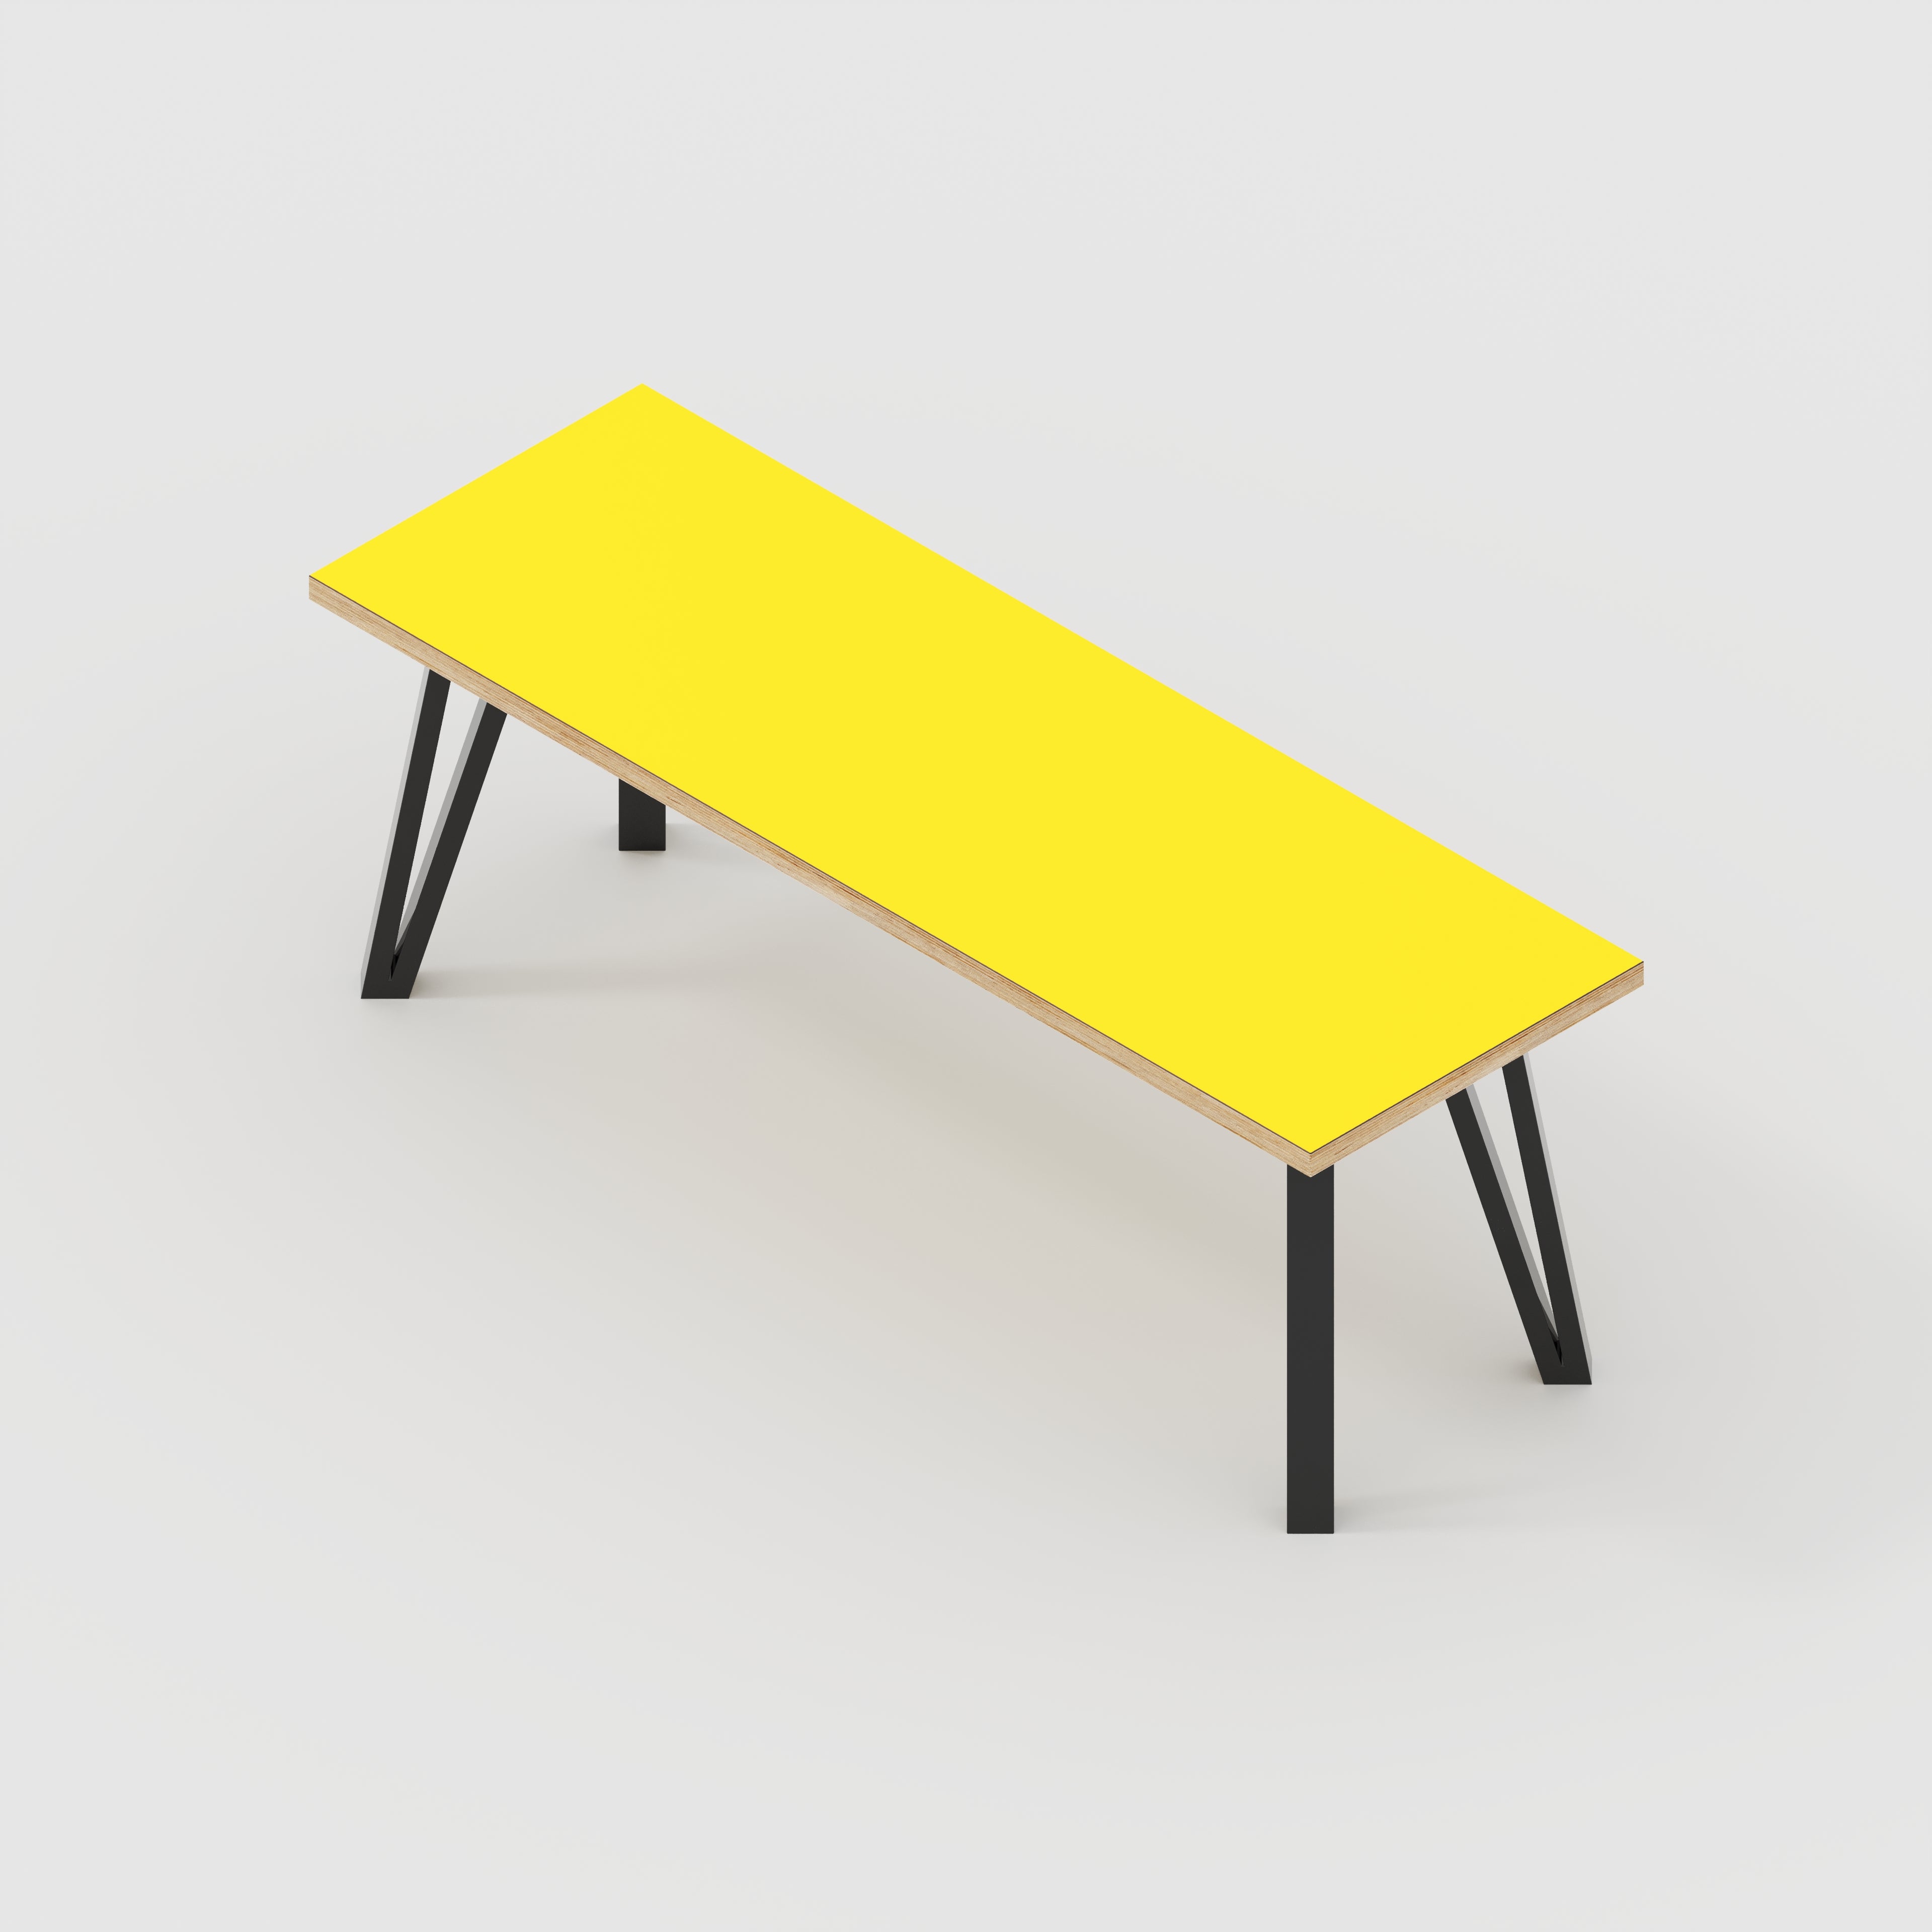 Bench Seat with Black Box Hairpin Legs - Formica Chrome Yellow - 1200(w) x 400(d) x 450(h)